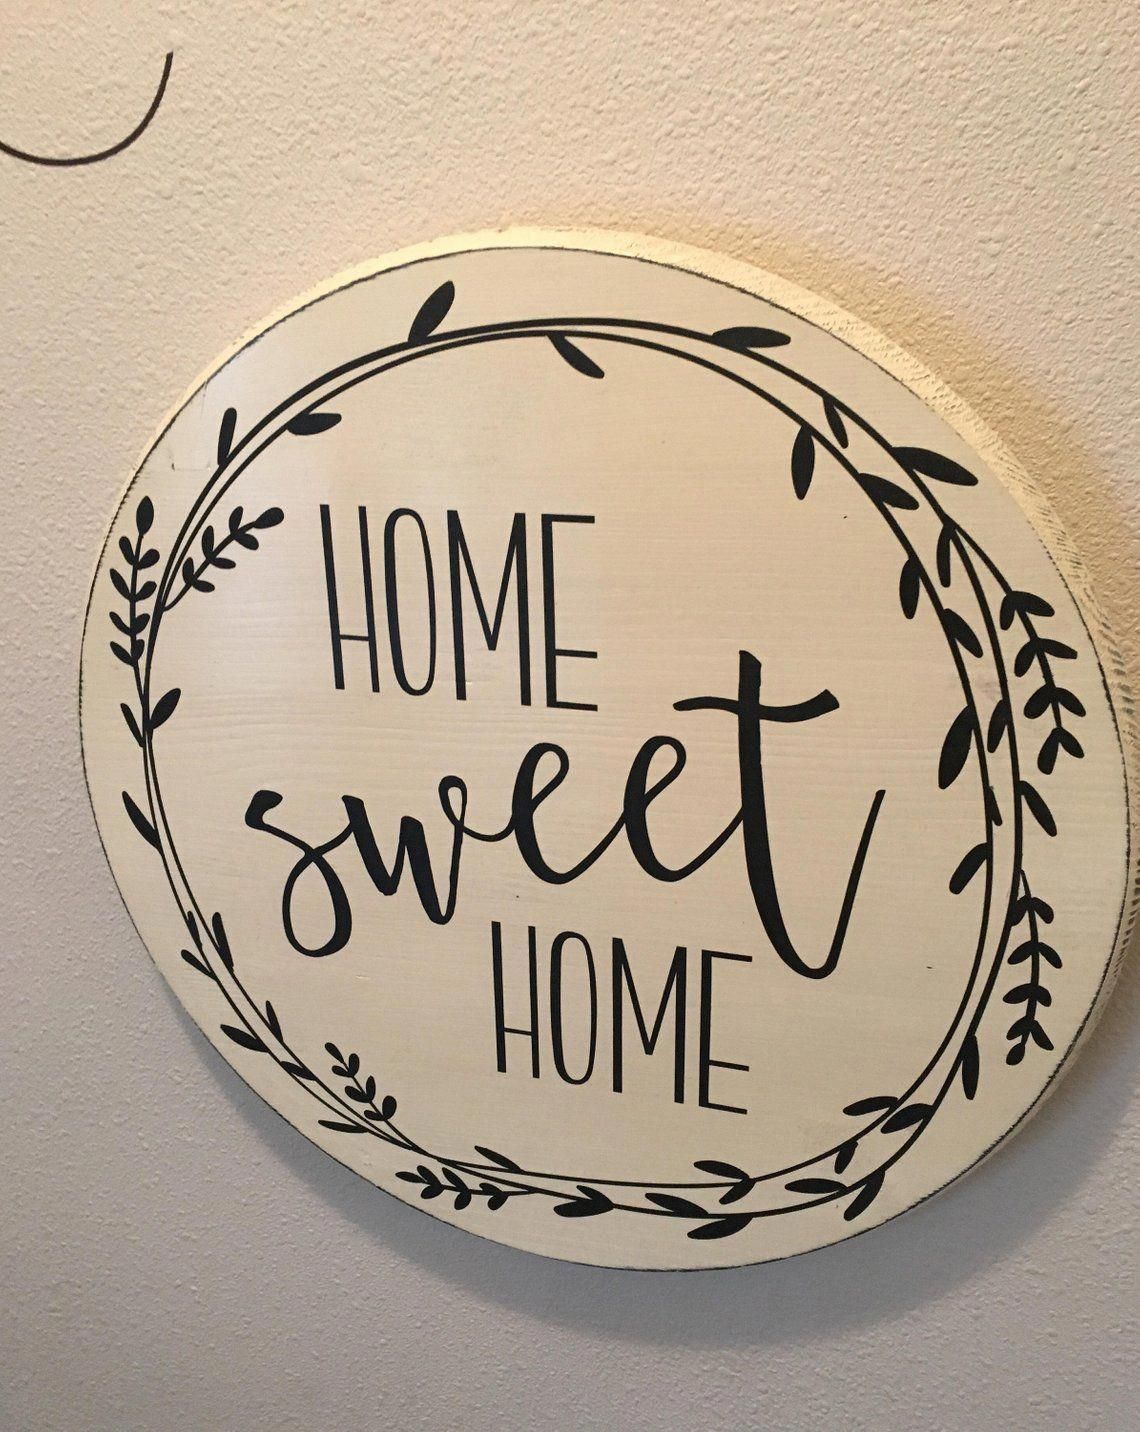 Home Sweet Home Round Wood sign - Farmhouse Decor - Rustic Decor - Home Decor - Home Sweet Home Round Wood sign - Farmhouse Decor - Rustic Decor - Home Decor -   18 diy Home Decor to sell ideas